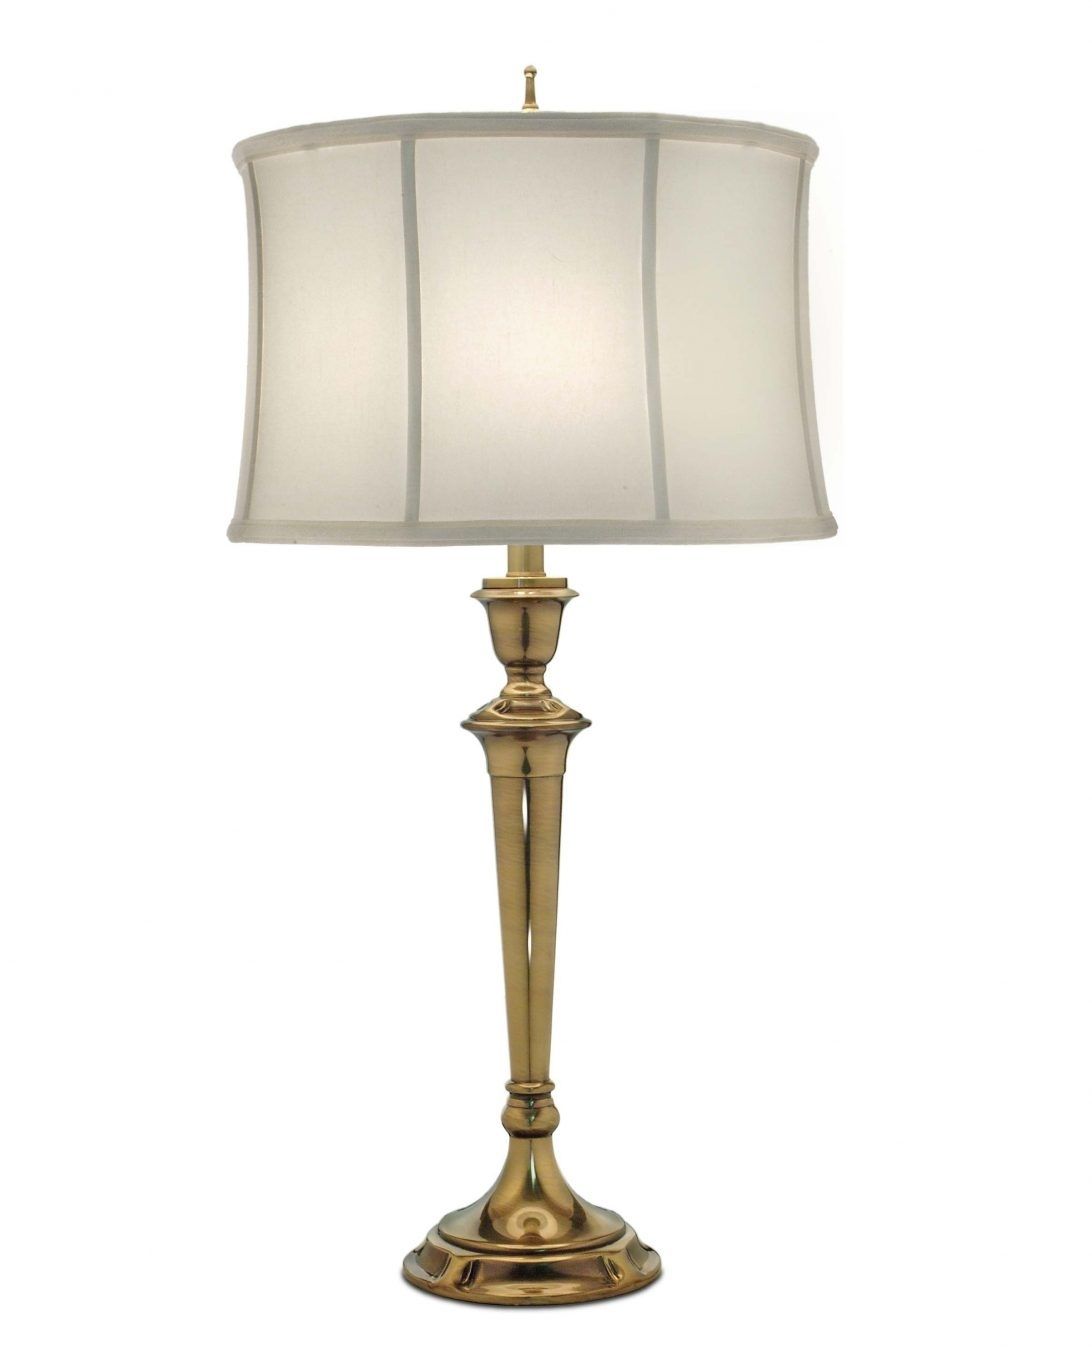 Top 62 Skookum Table Lamp Shades Lamps For Living Room Traditional Pertaining To Traditional Table Lamps For Living Room (View 10 of 15)